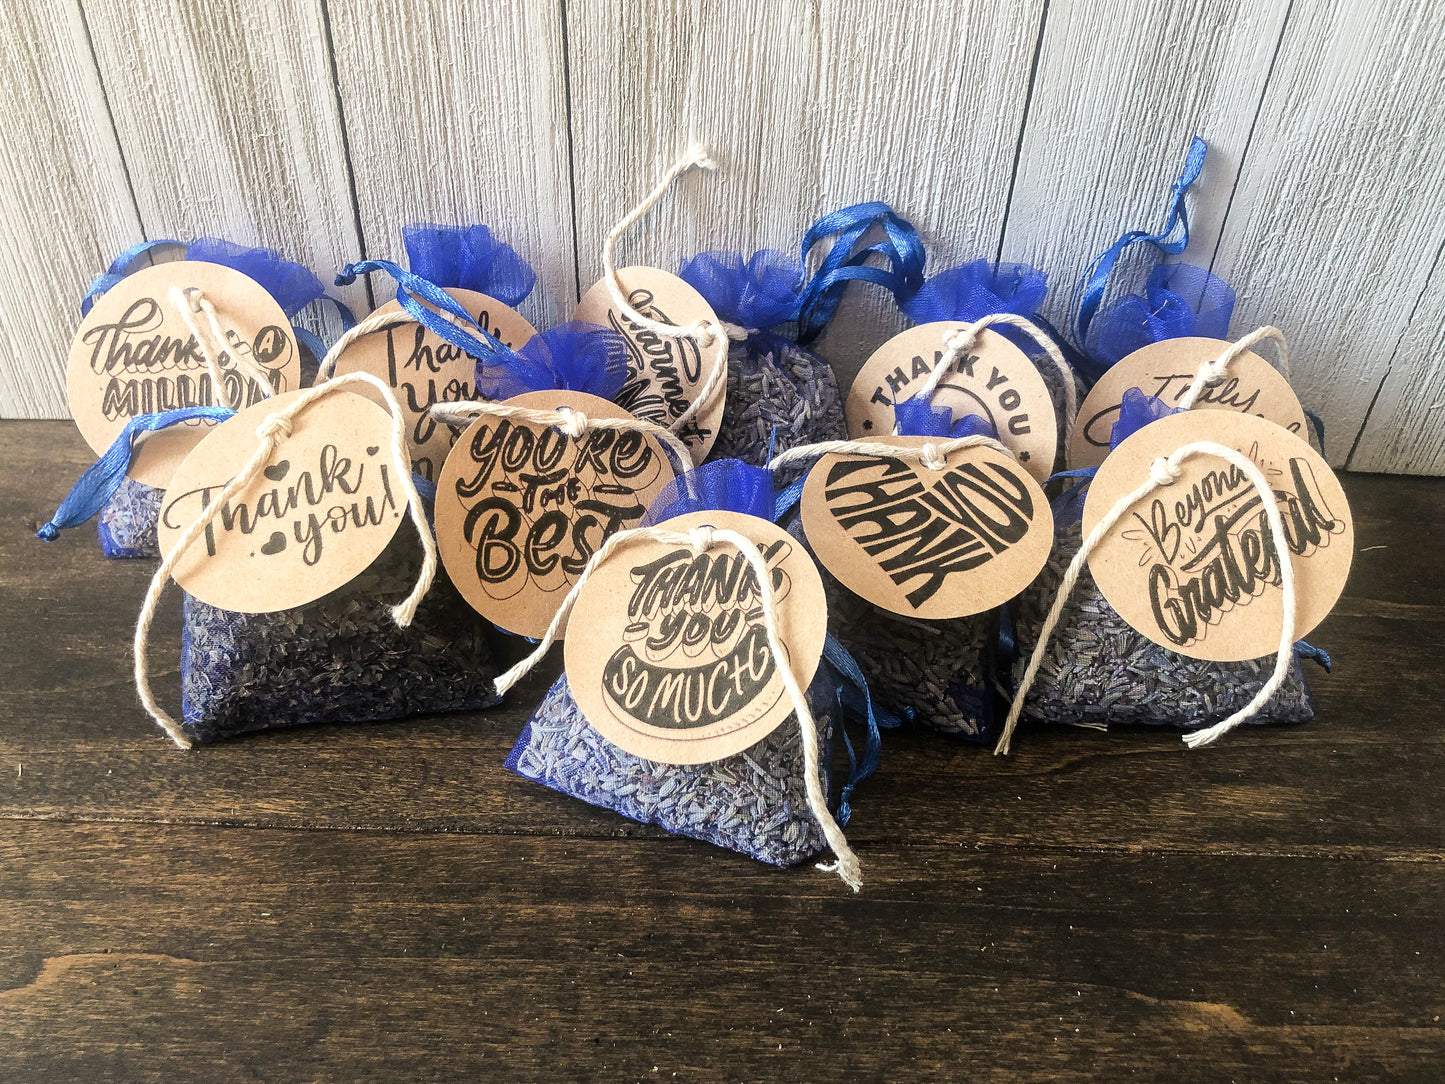 bulk potpourri sachets for party favors/appreciation gifts on wooden background